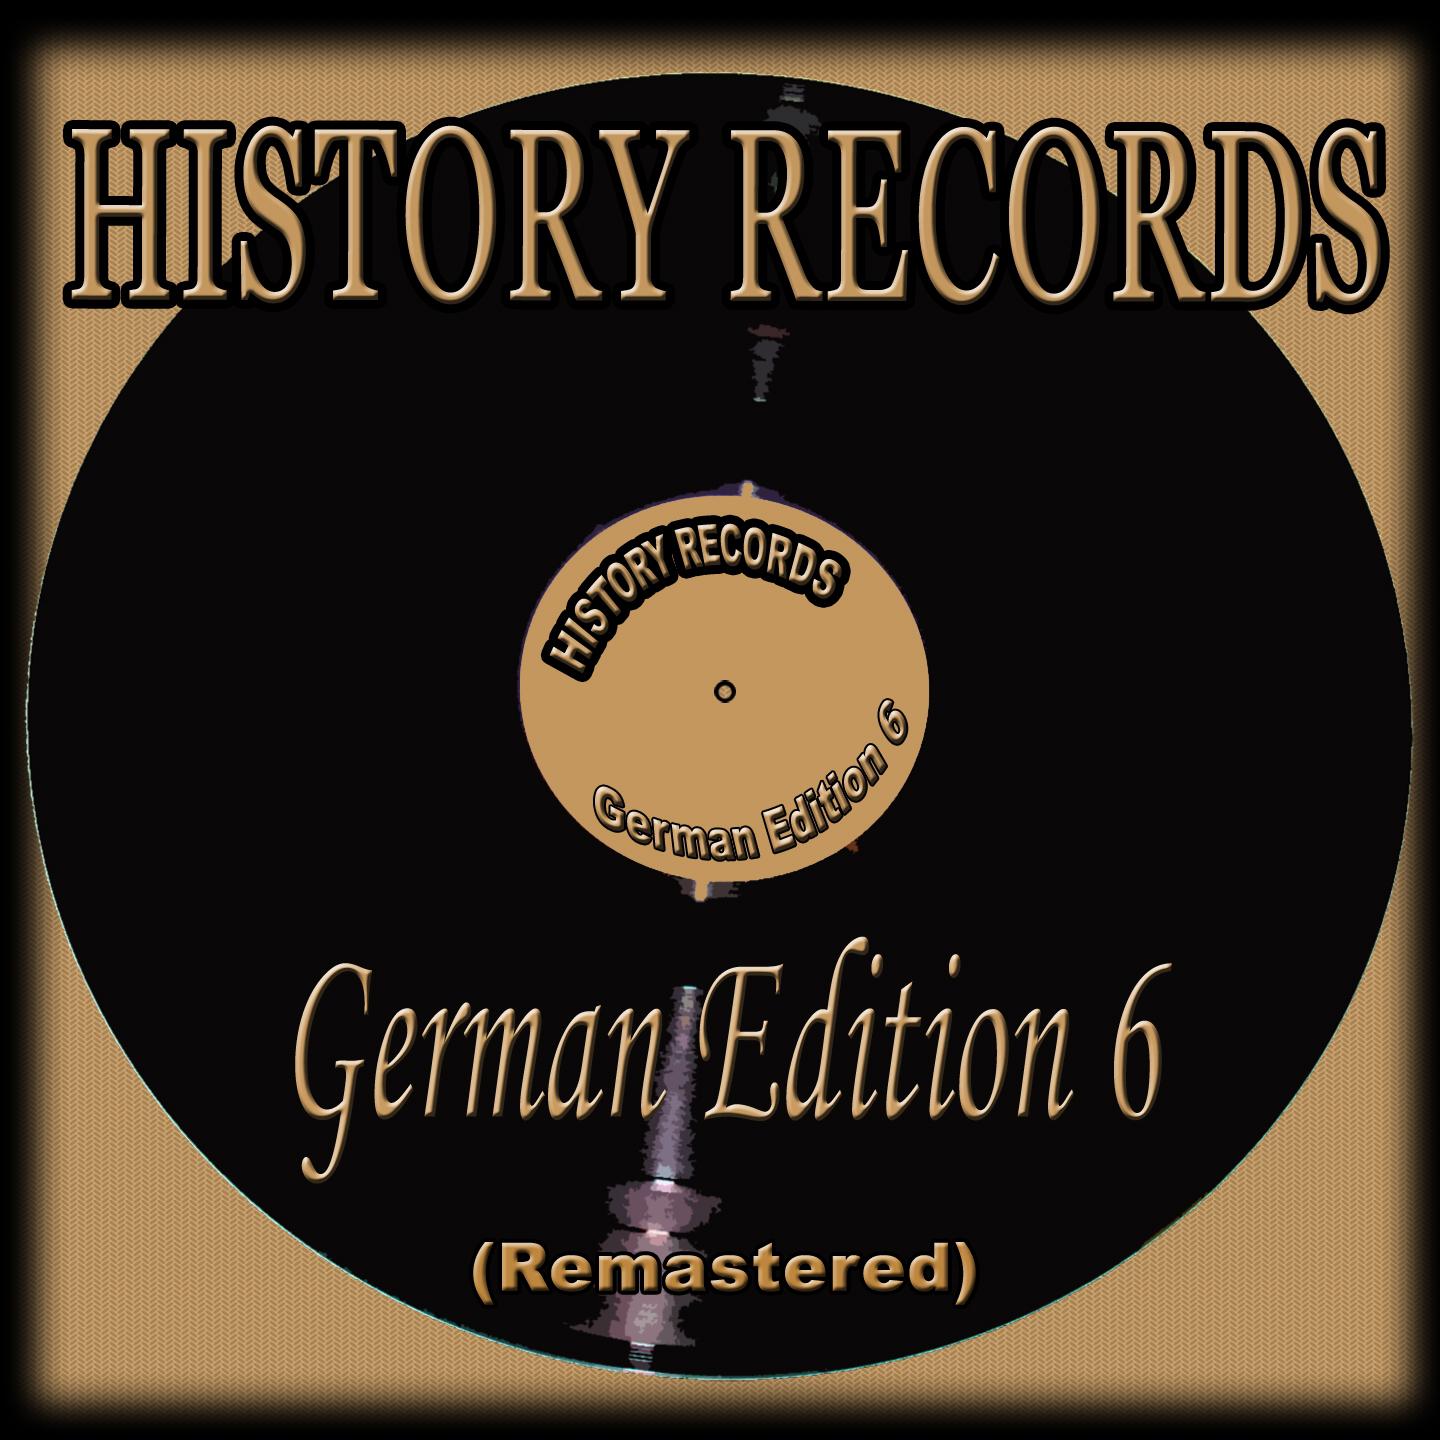 History Records - German Edition 6 (Remastered)